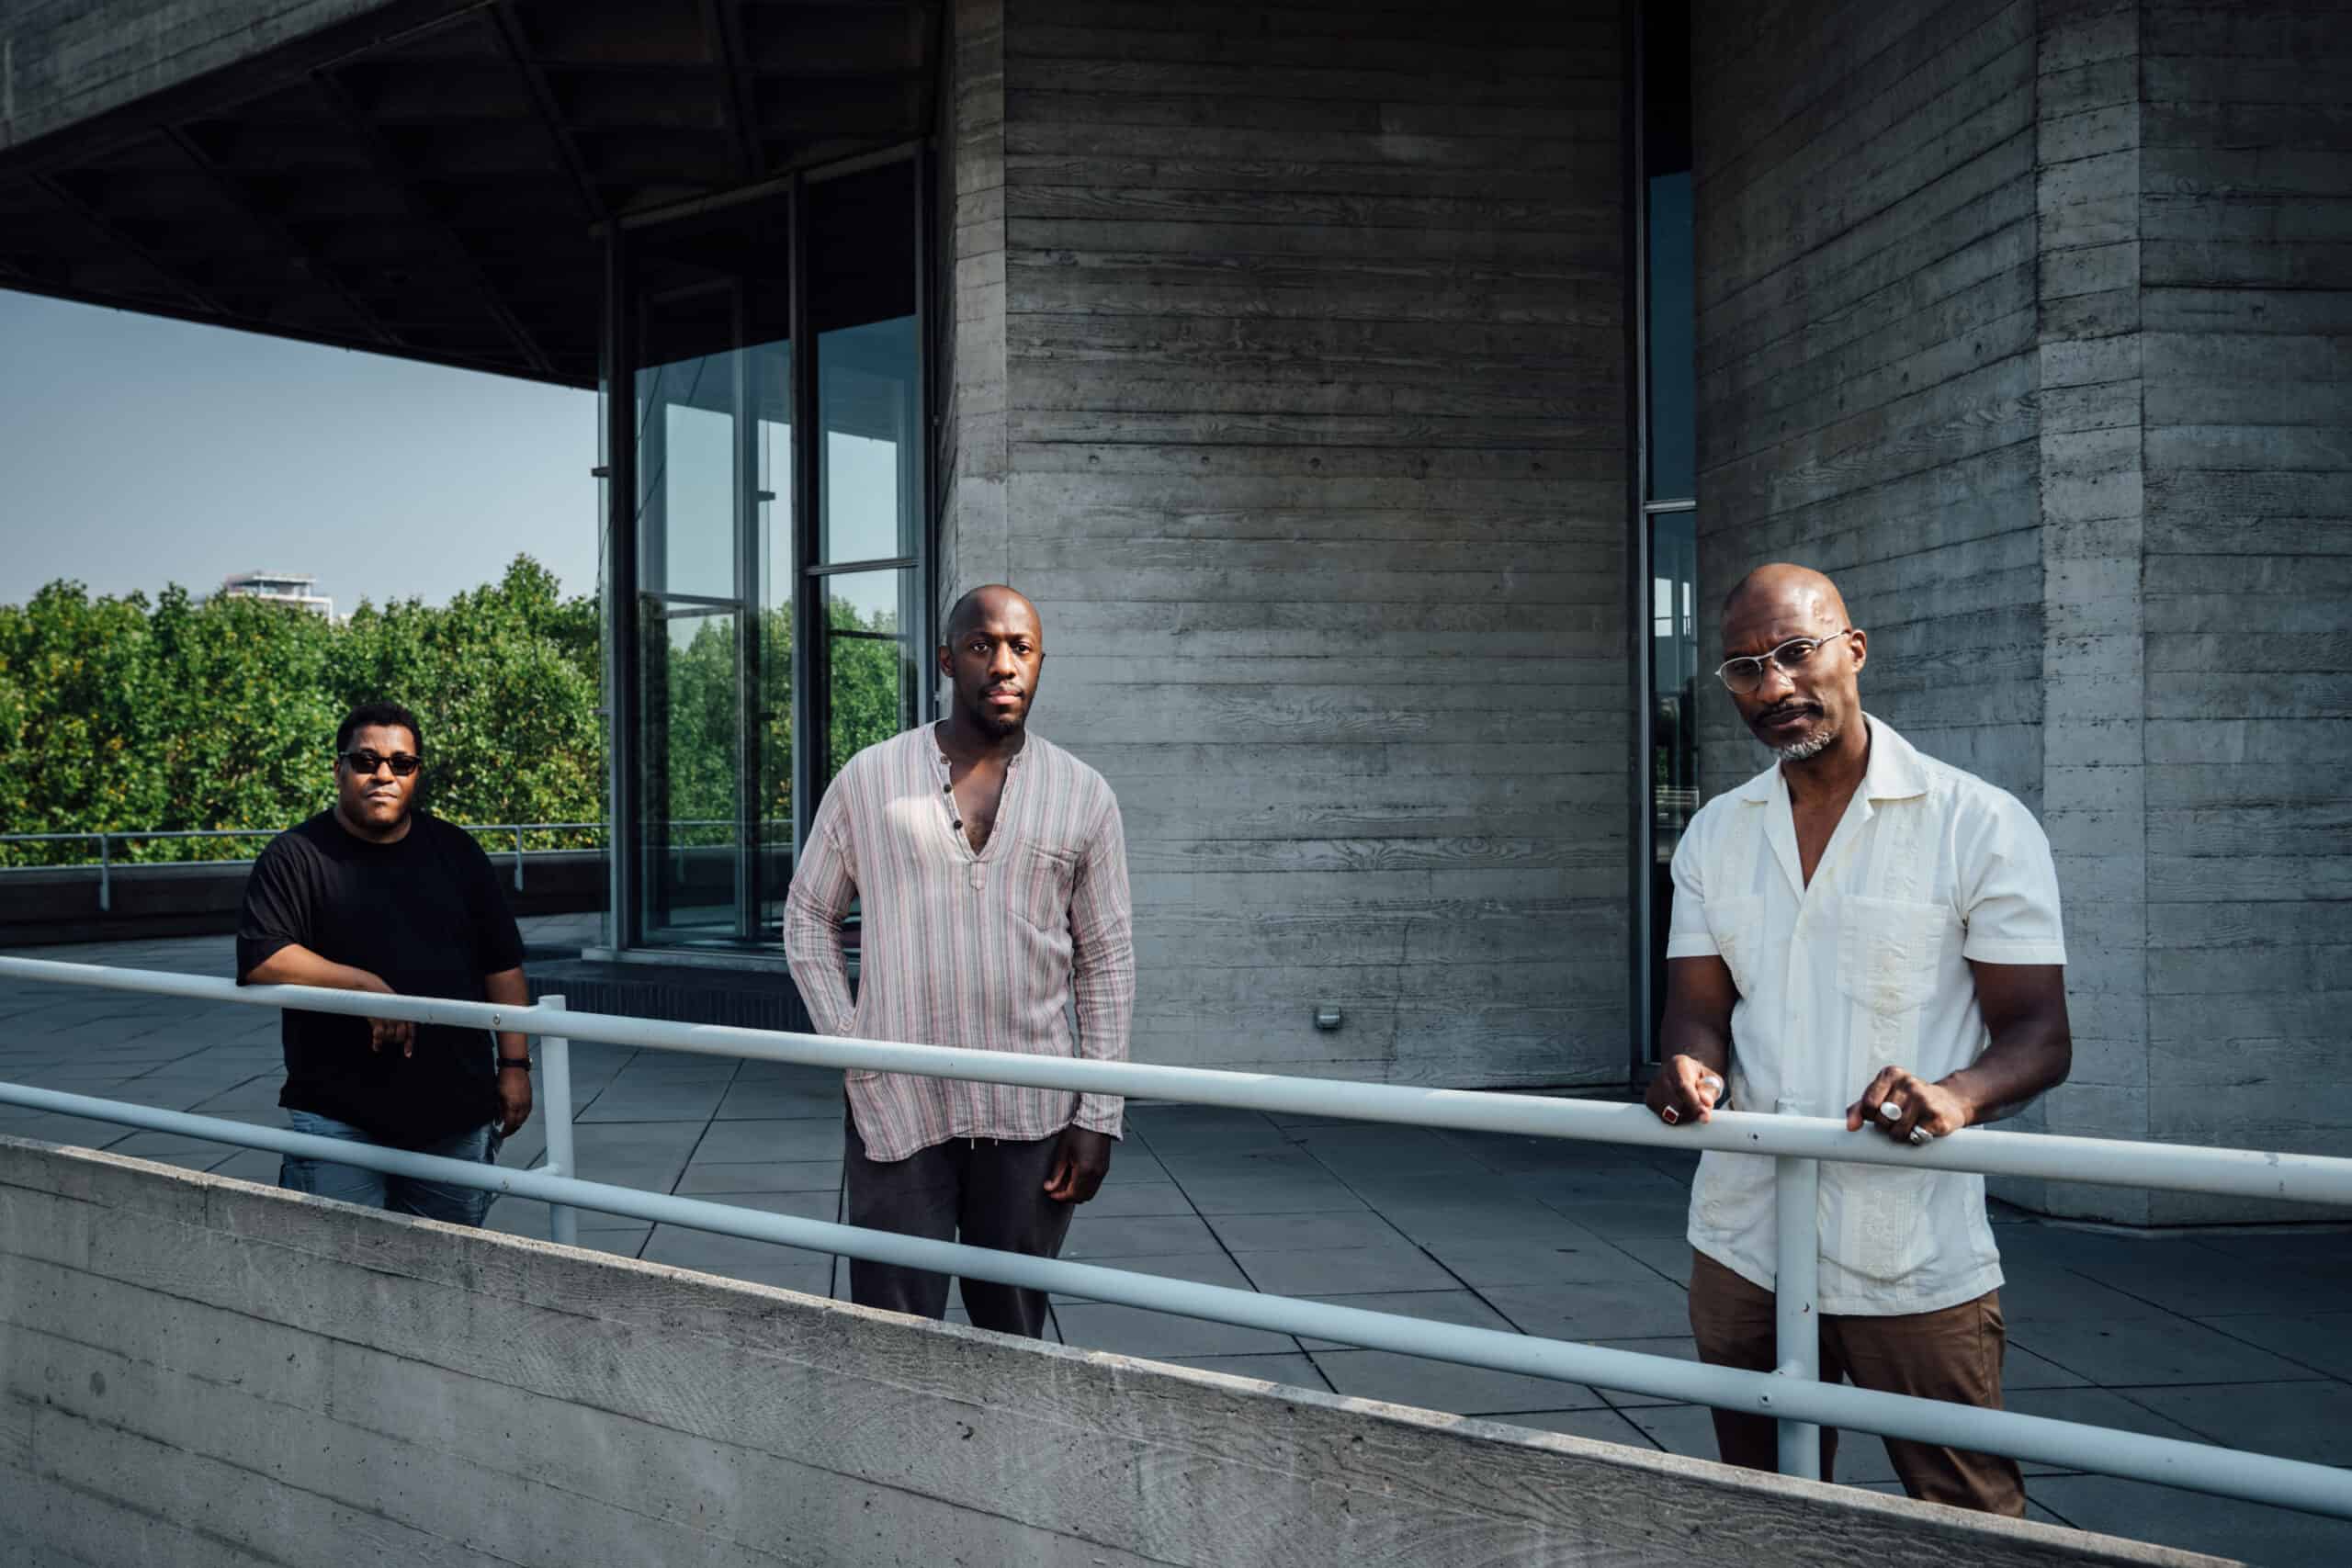 Roy Willams ;
Giles Terera ;
Clint Dyer ;
National Theatre ;
London, UK ;
12th August 2020 ;
Credit and copyright: Helen Murray